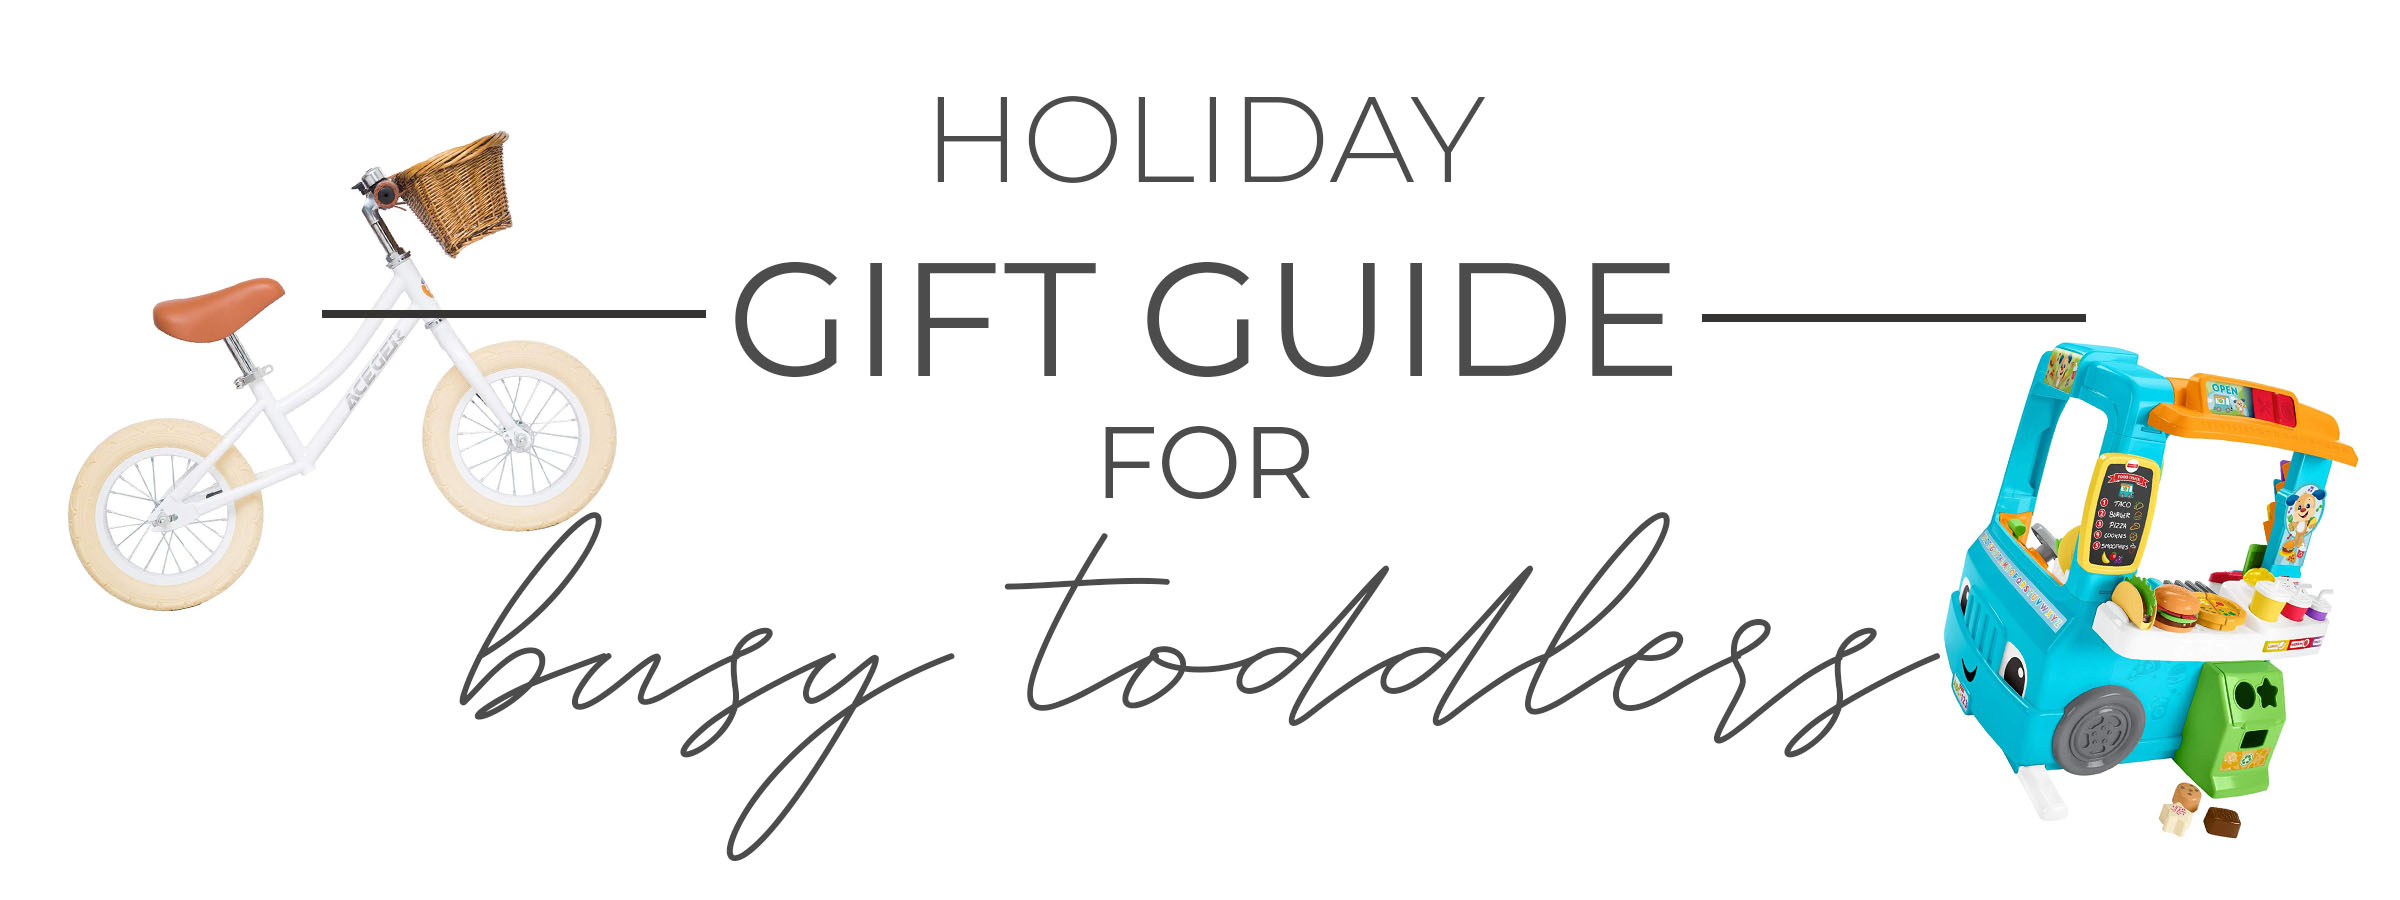 Best Gifts For Busy Toddlers 2019